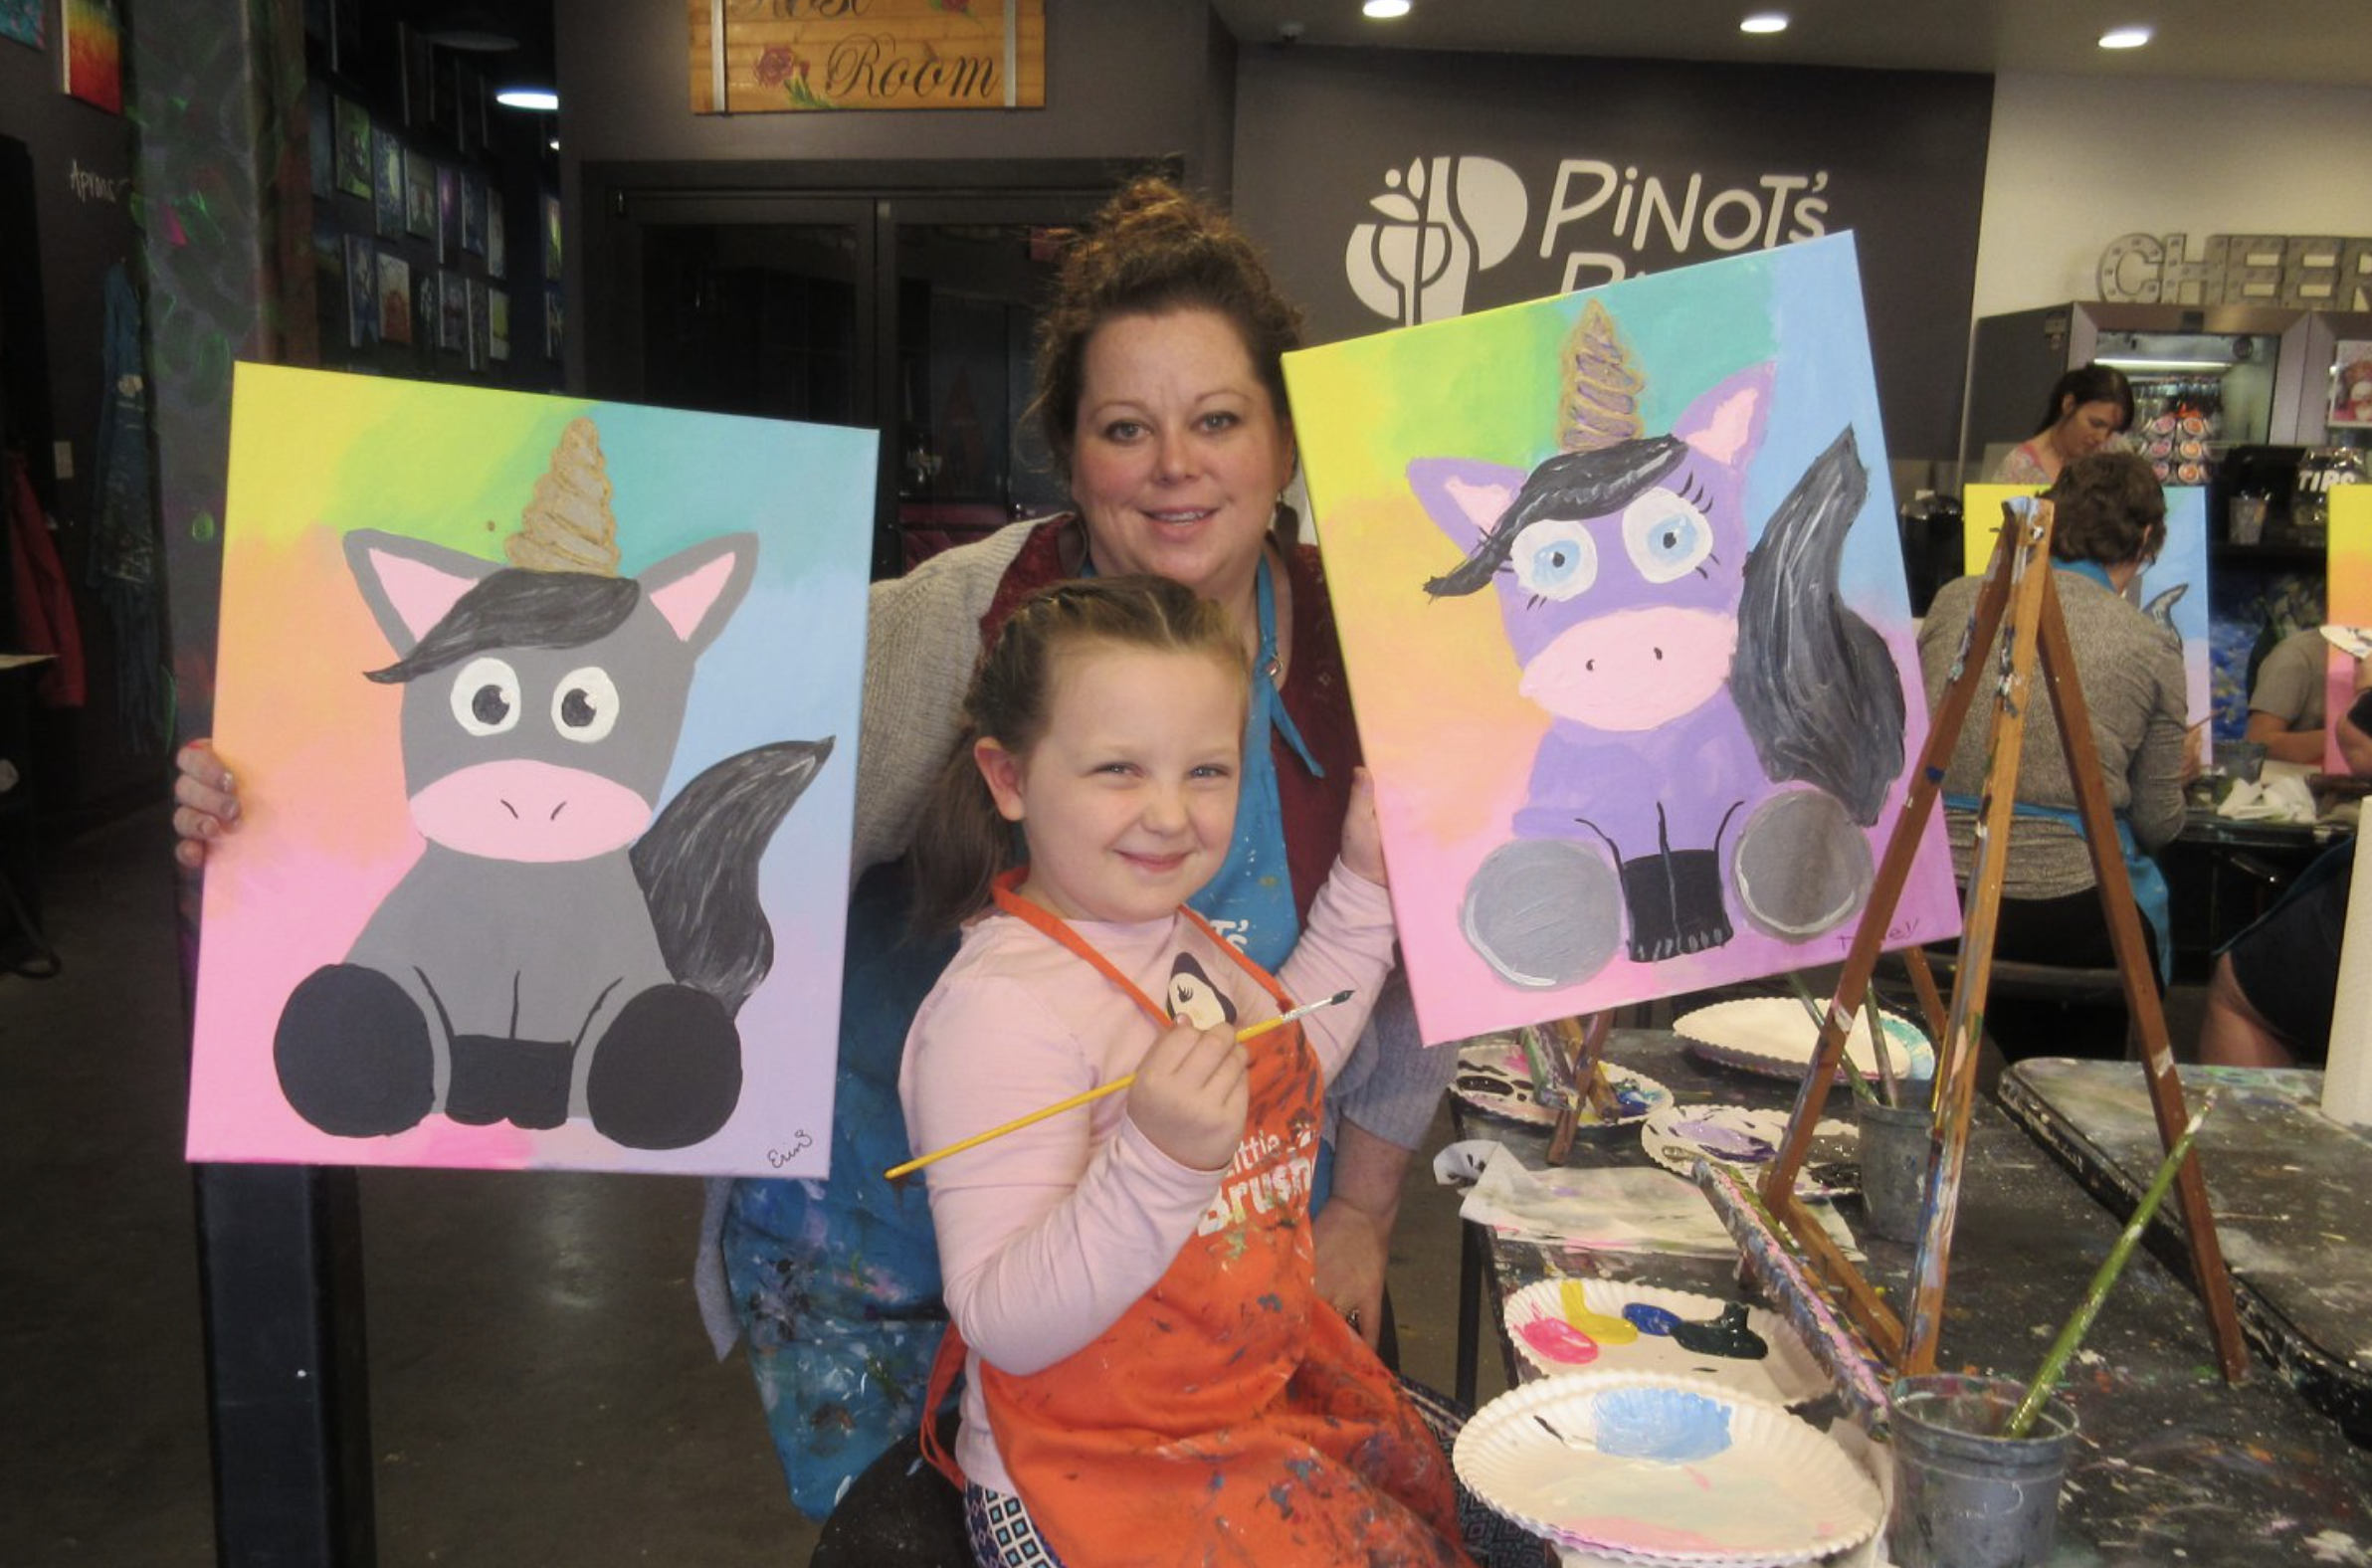 Little Brushes classes every Tuesday this summer!